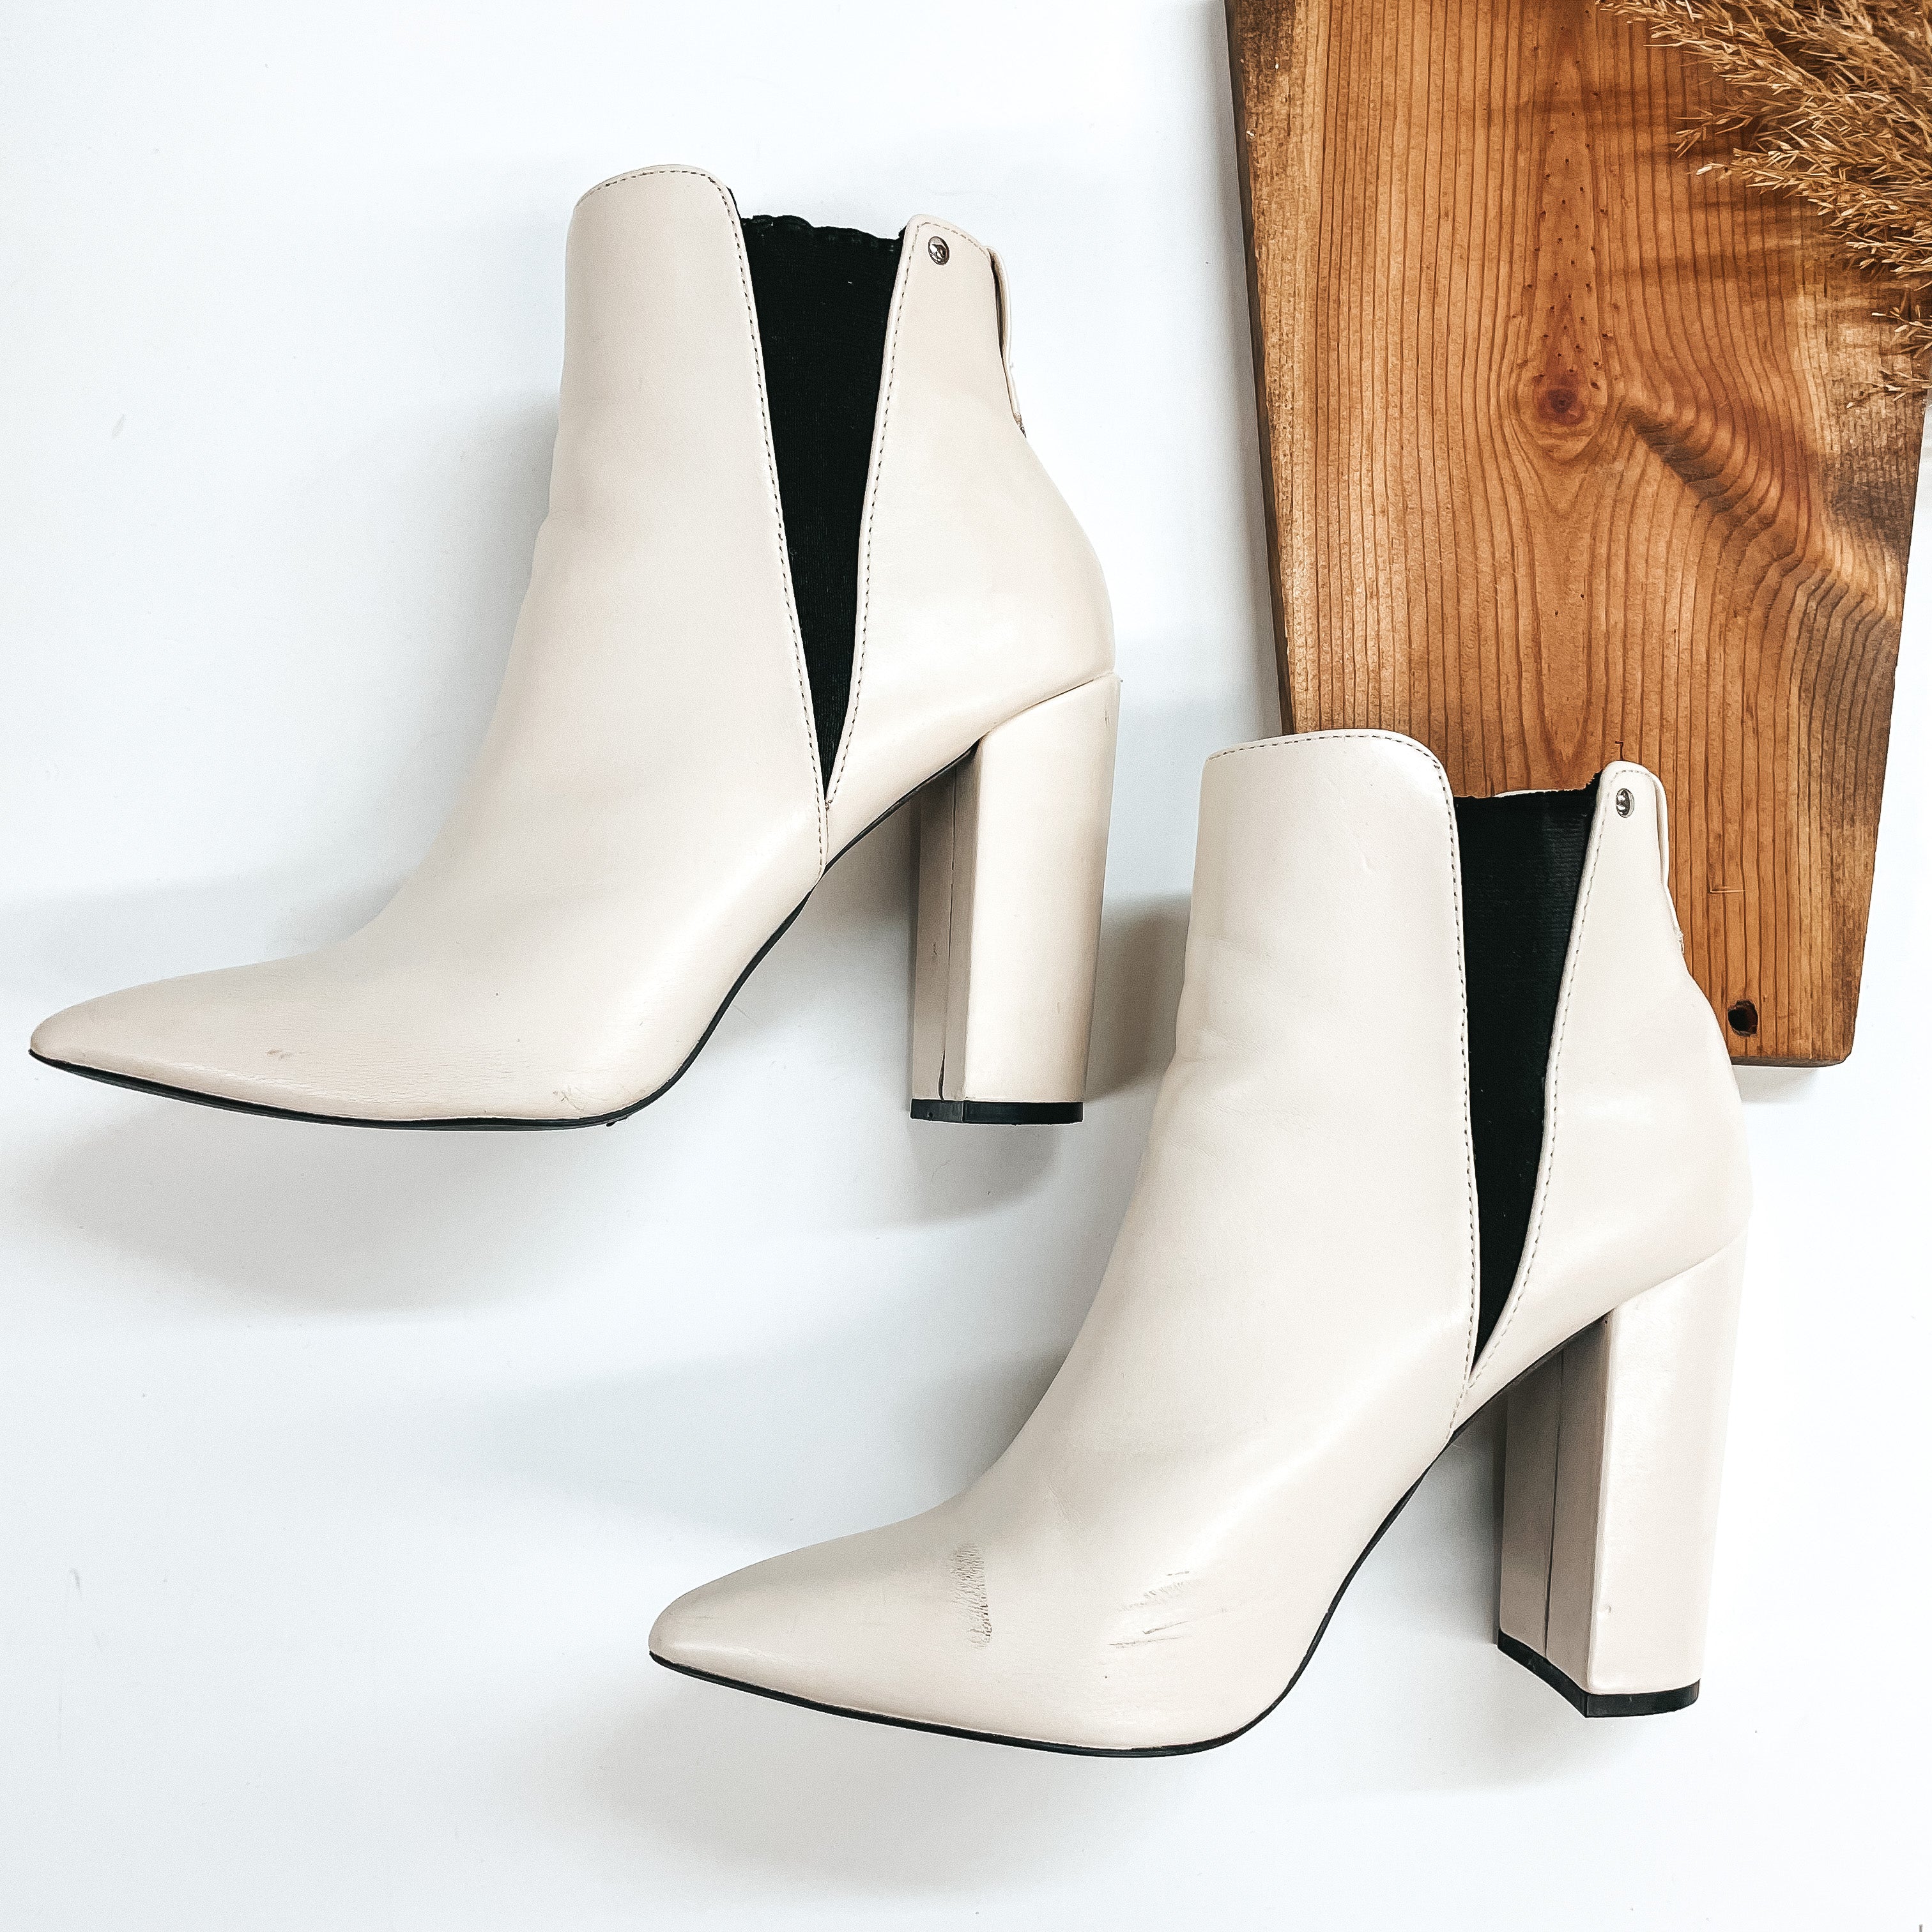 Model Shoes Size 9 | Made For Walking Pointed Toe Booties in Ivory - Giddy Up Glamour Boutique